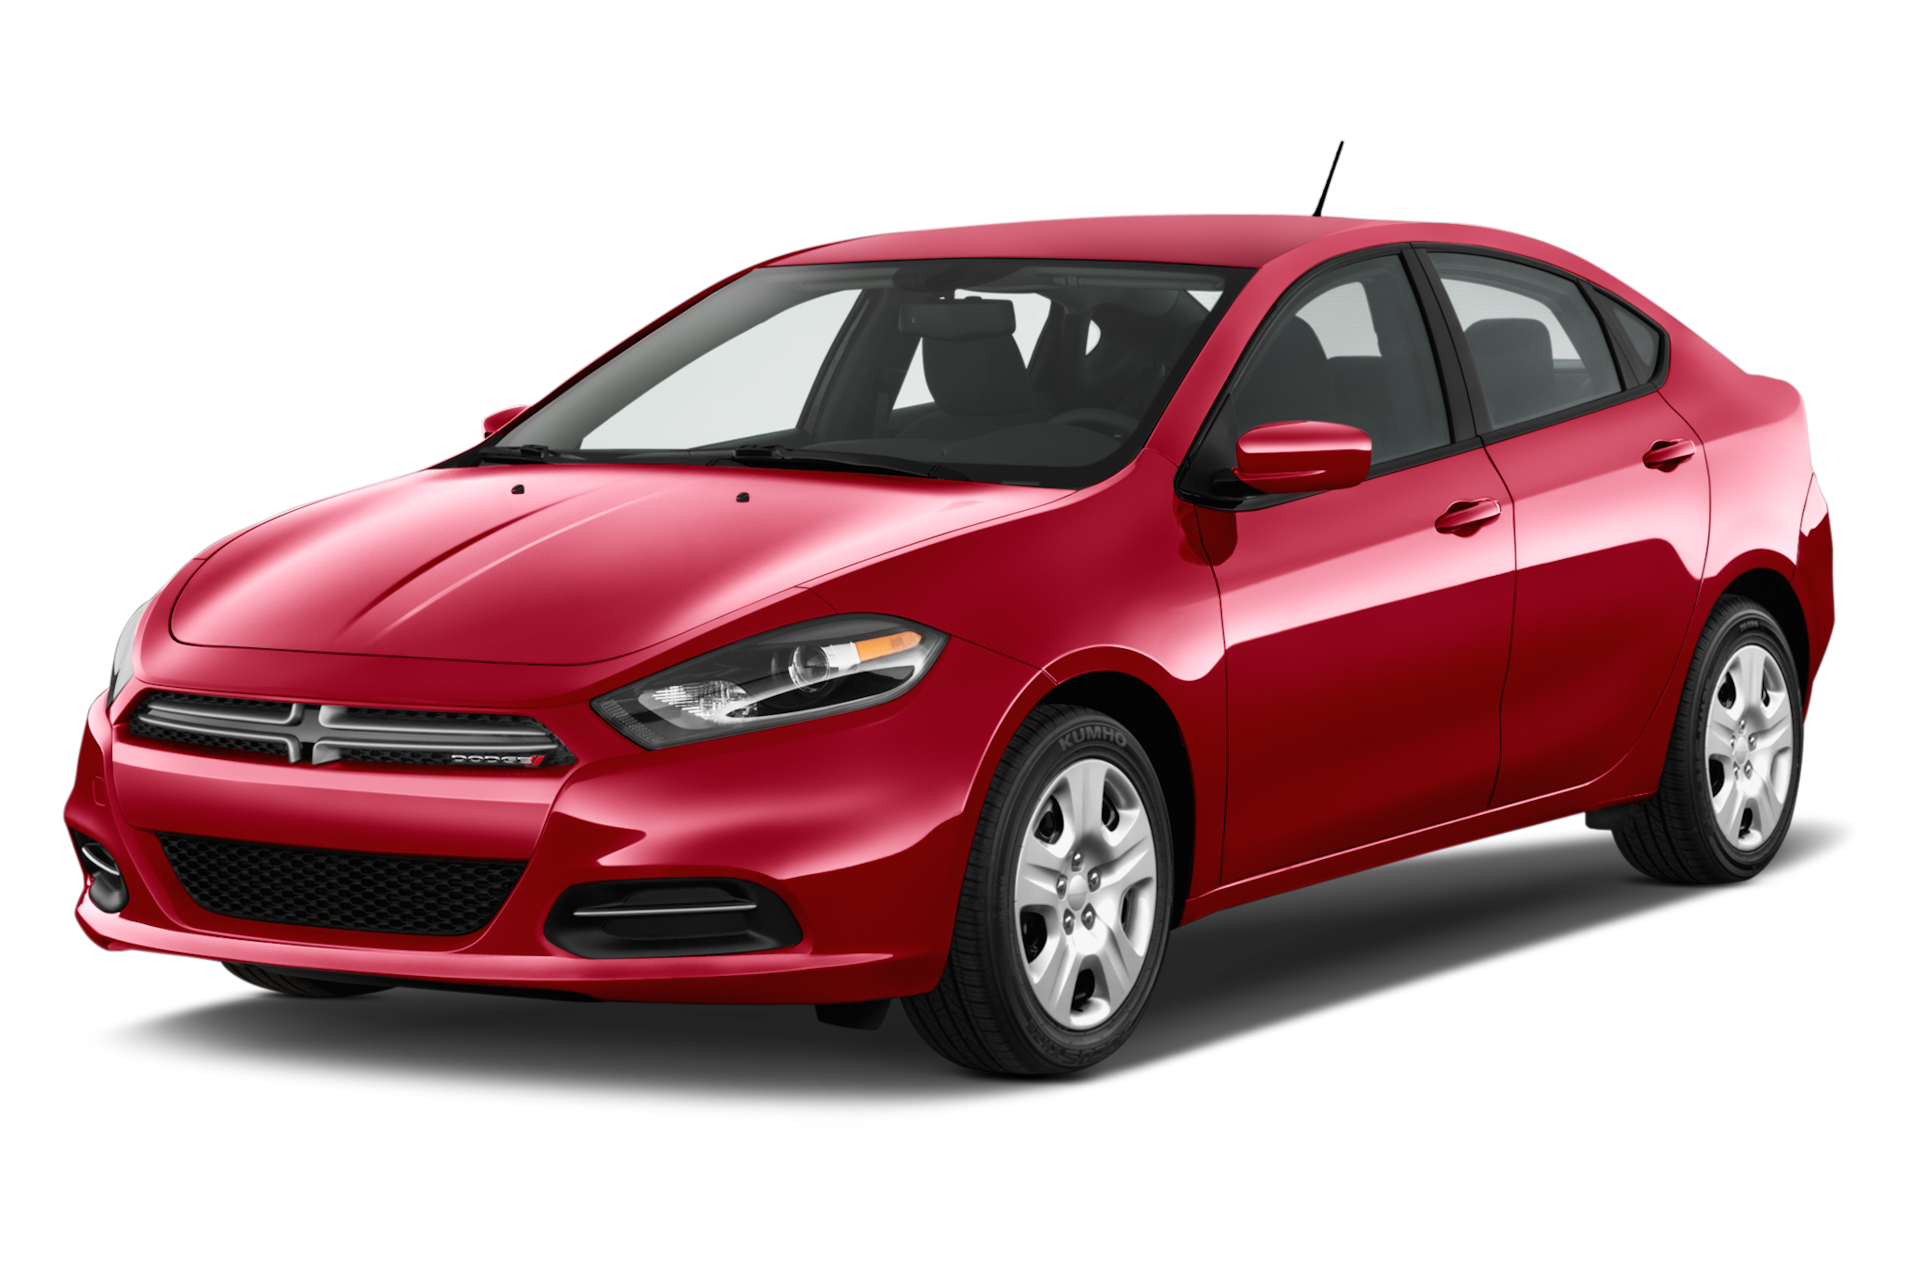 2014 Dodge Dart Prices, Reviews, and Photos - MotorTrend